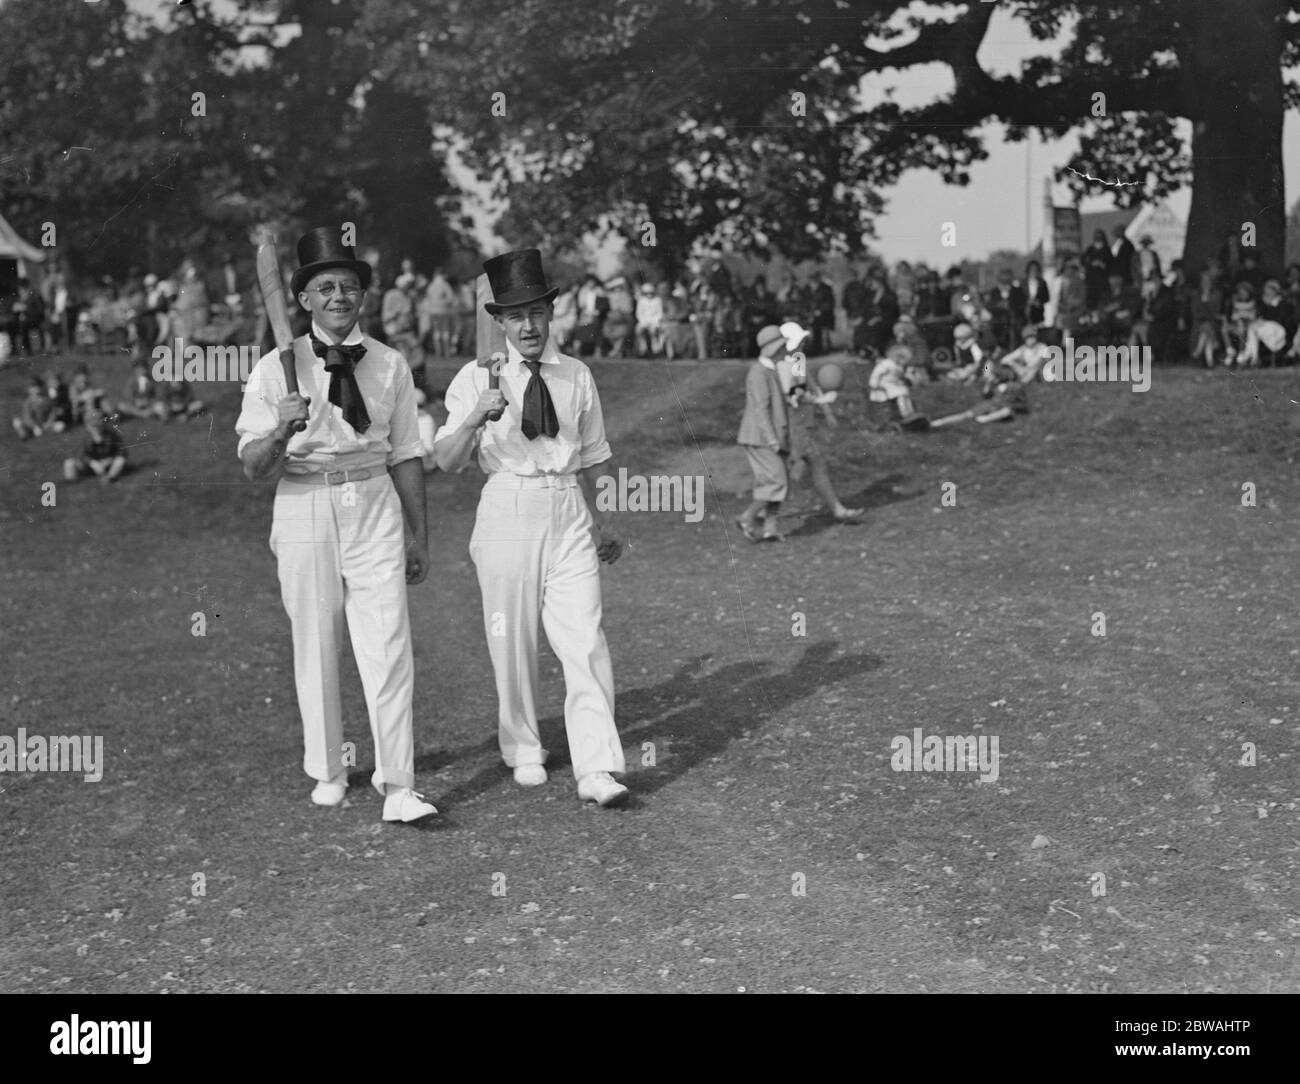 Top hats and side whiskers were worn by players in an old time cricket match between Tonbridge and Tunbridge Wells on the village green at Southborough 13 September 1931 Stock Photo